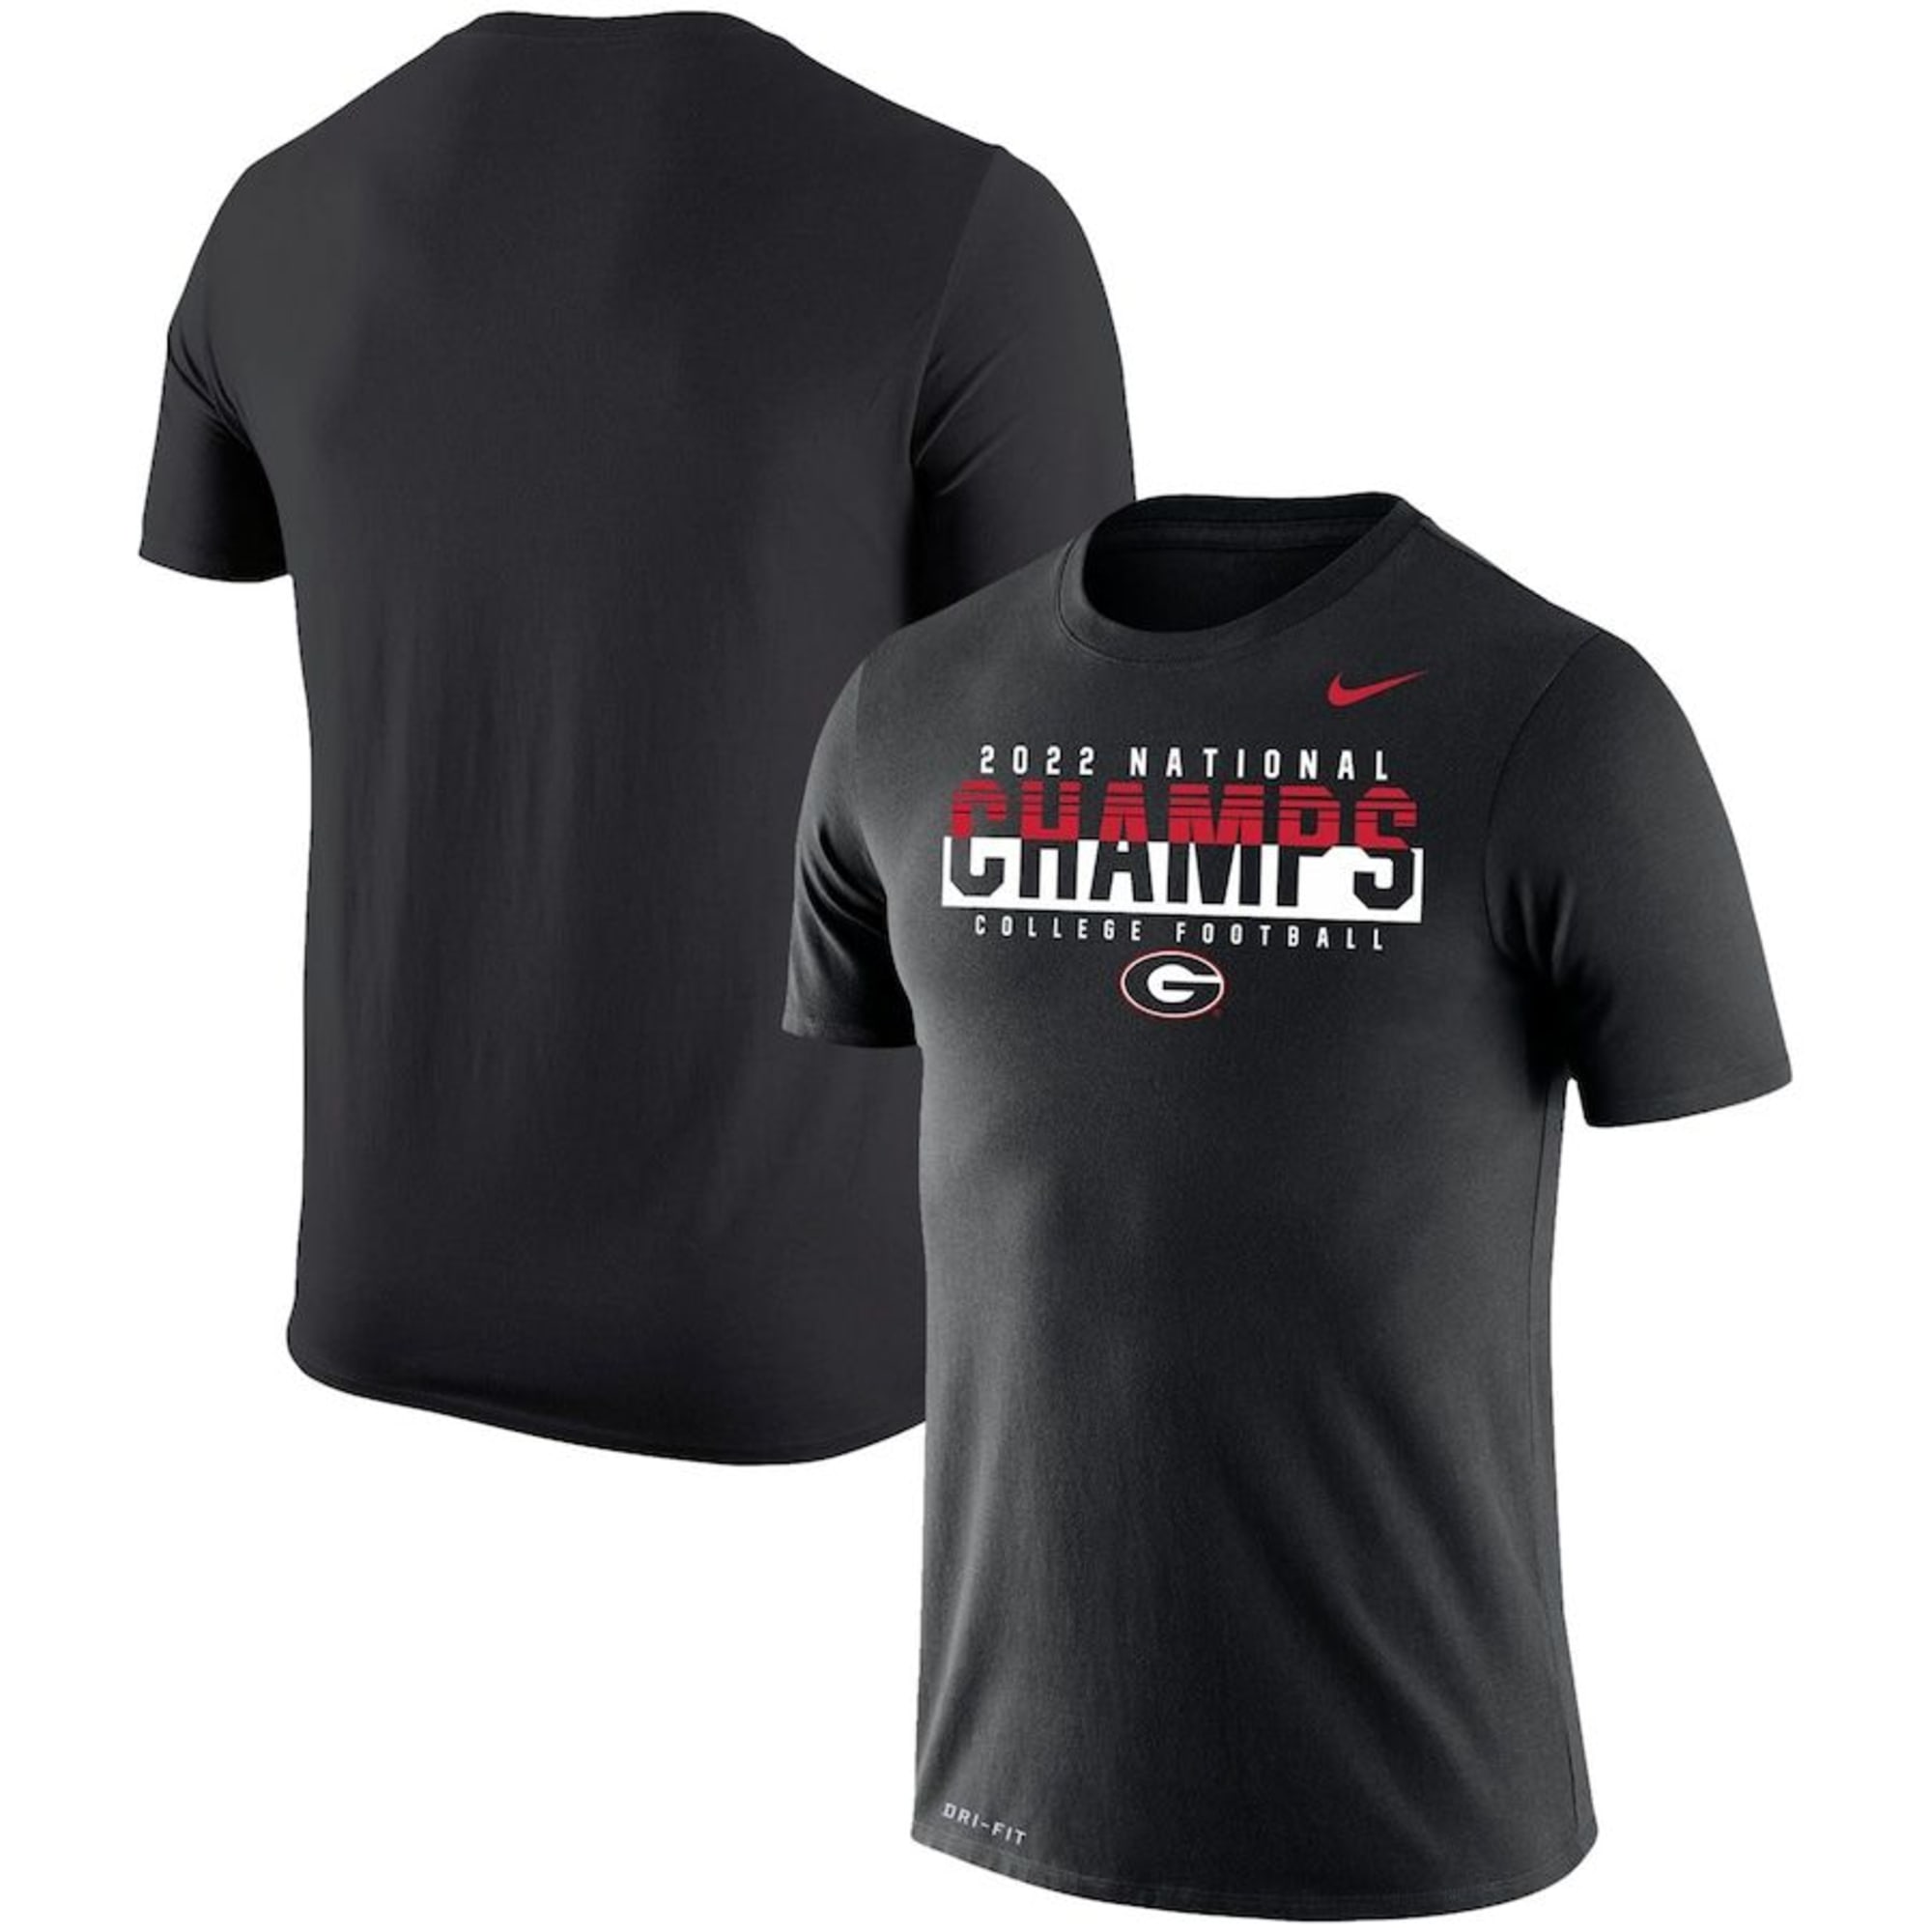 Get your Georgia Bulldogs National Champions shirts (and more) now